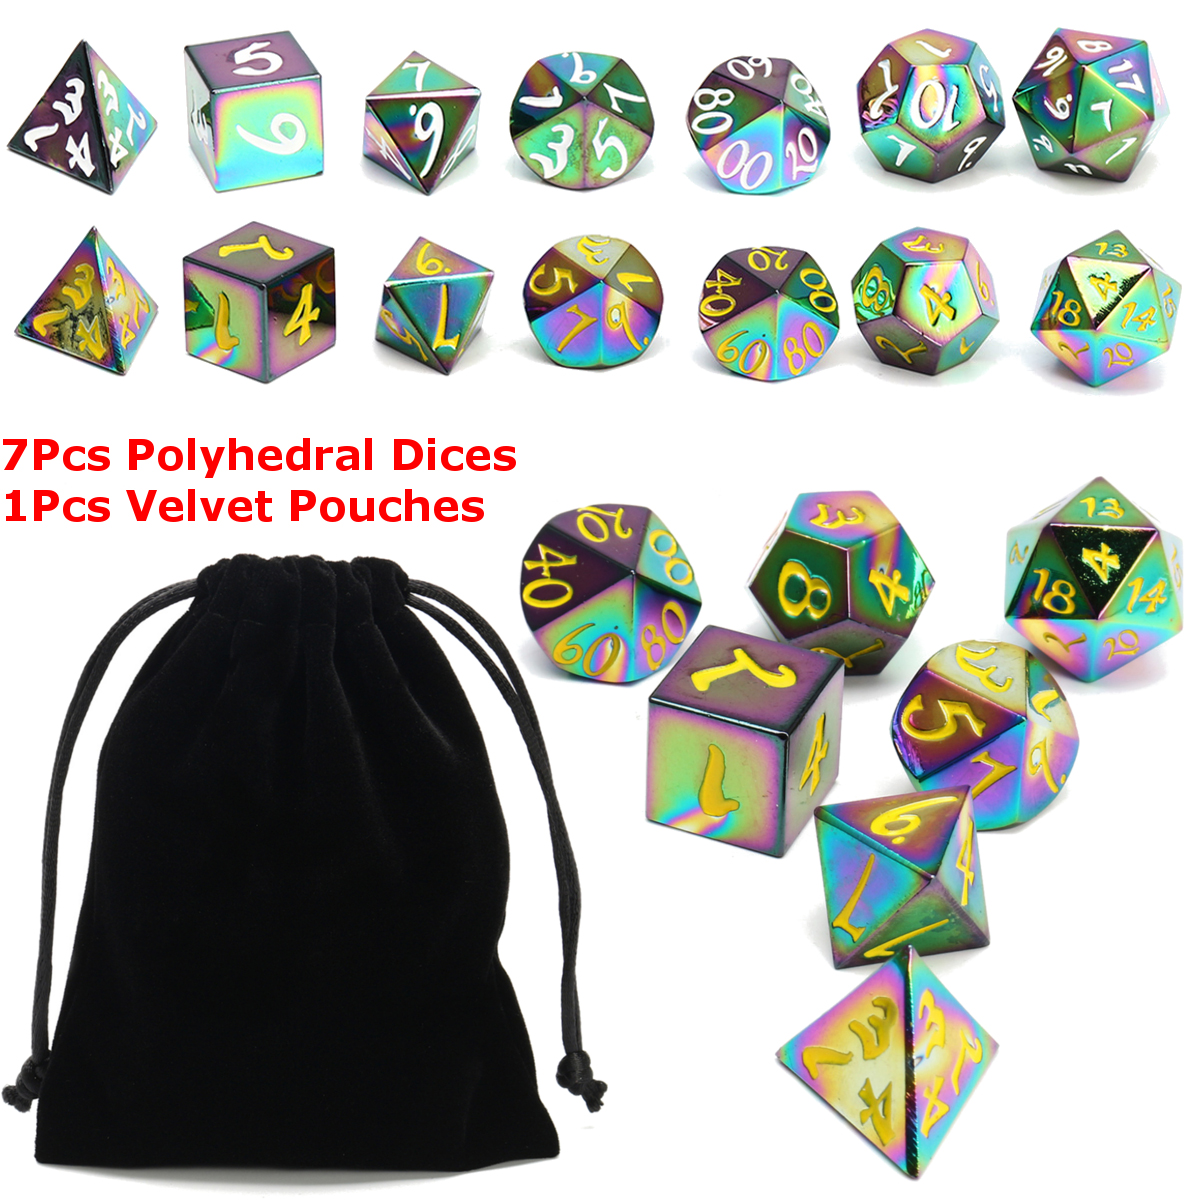 7Pcs-Antique-Metal-Polyhedral-Dices-Set-Role-Playing-Game-Gadget-With-Bag-1287723-1